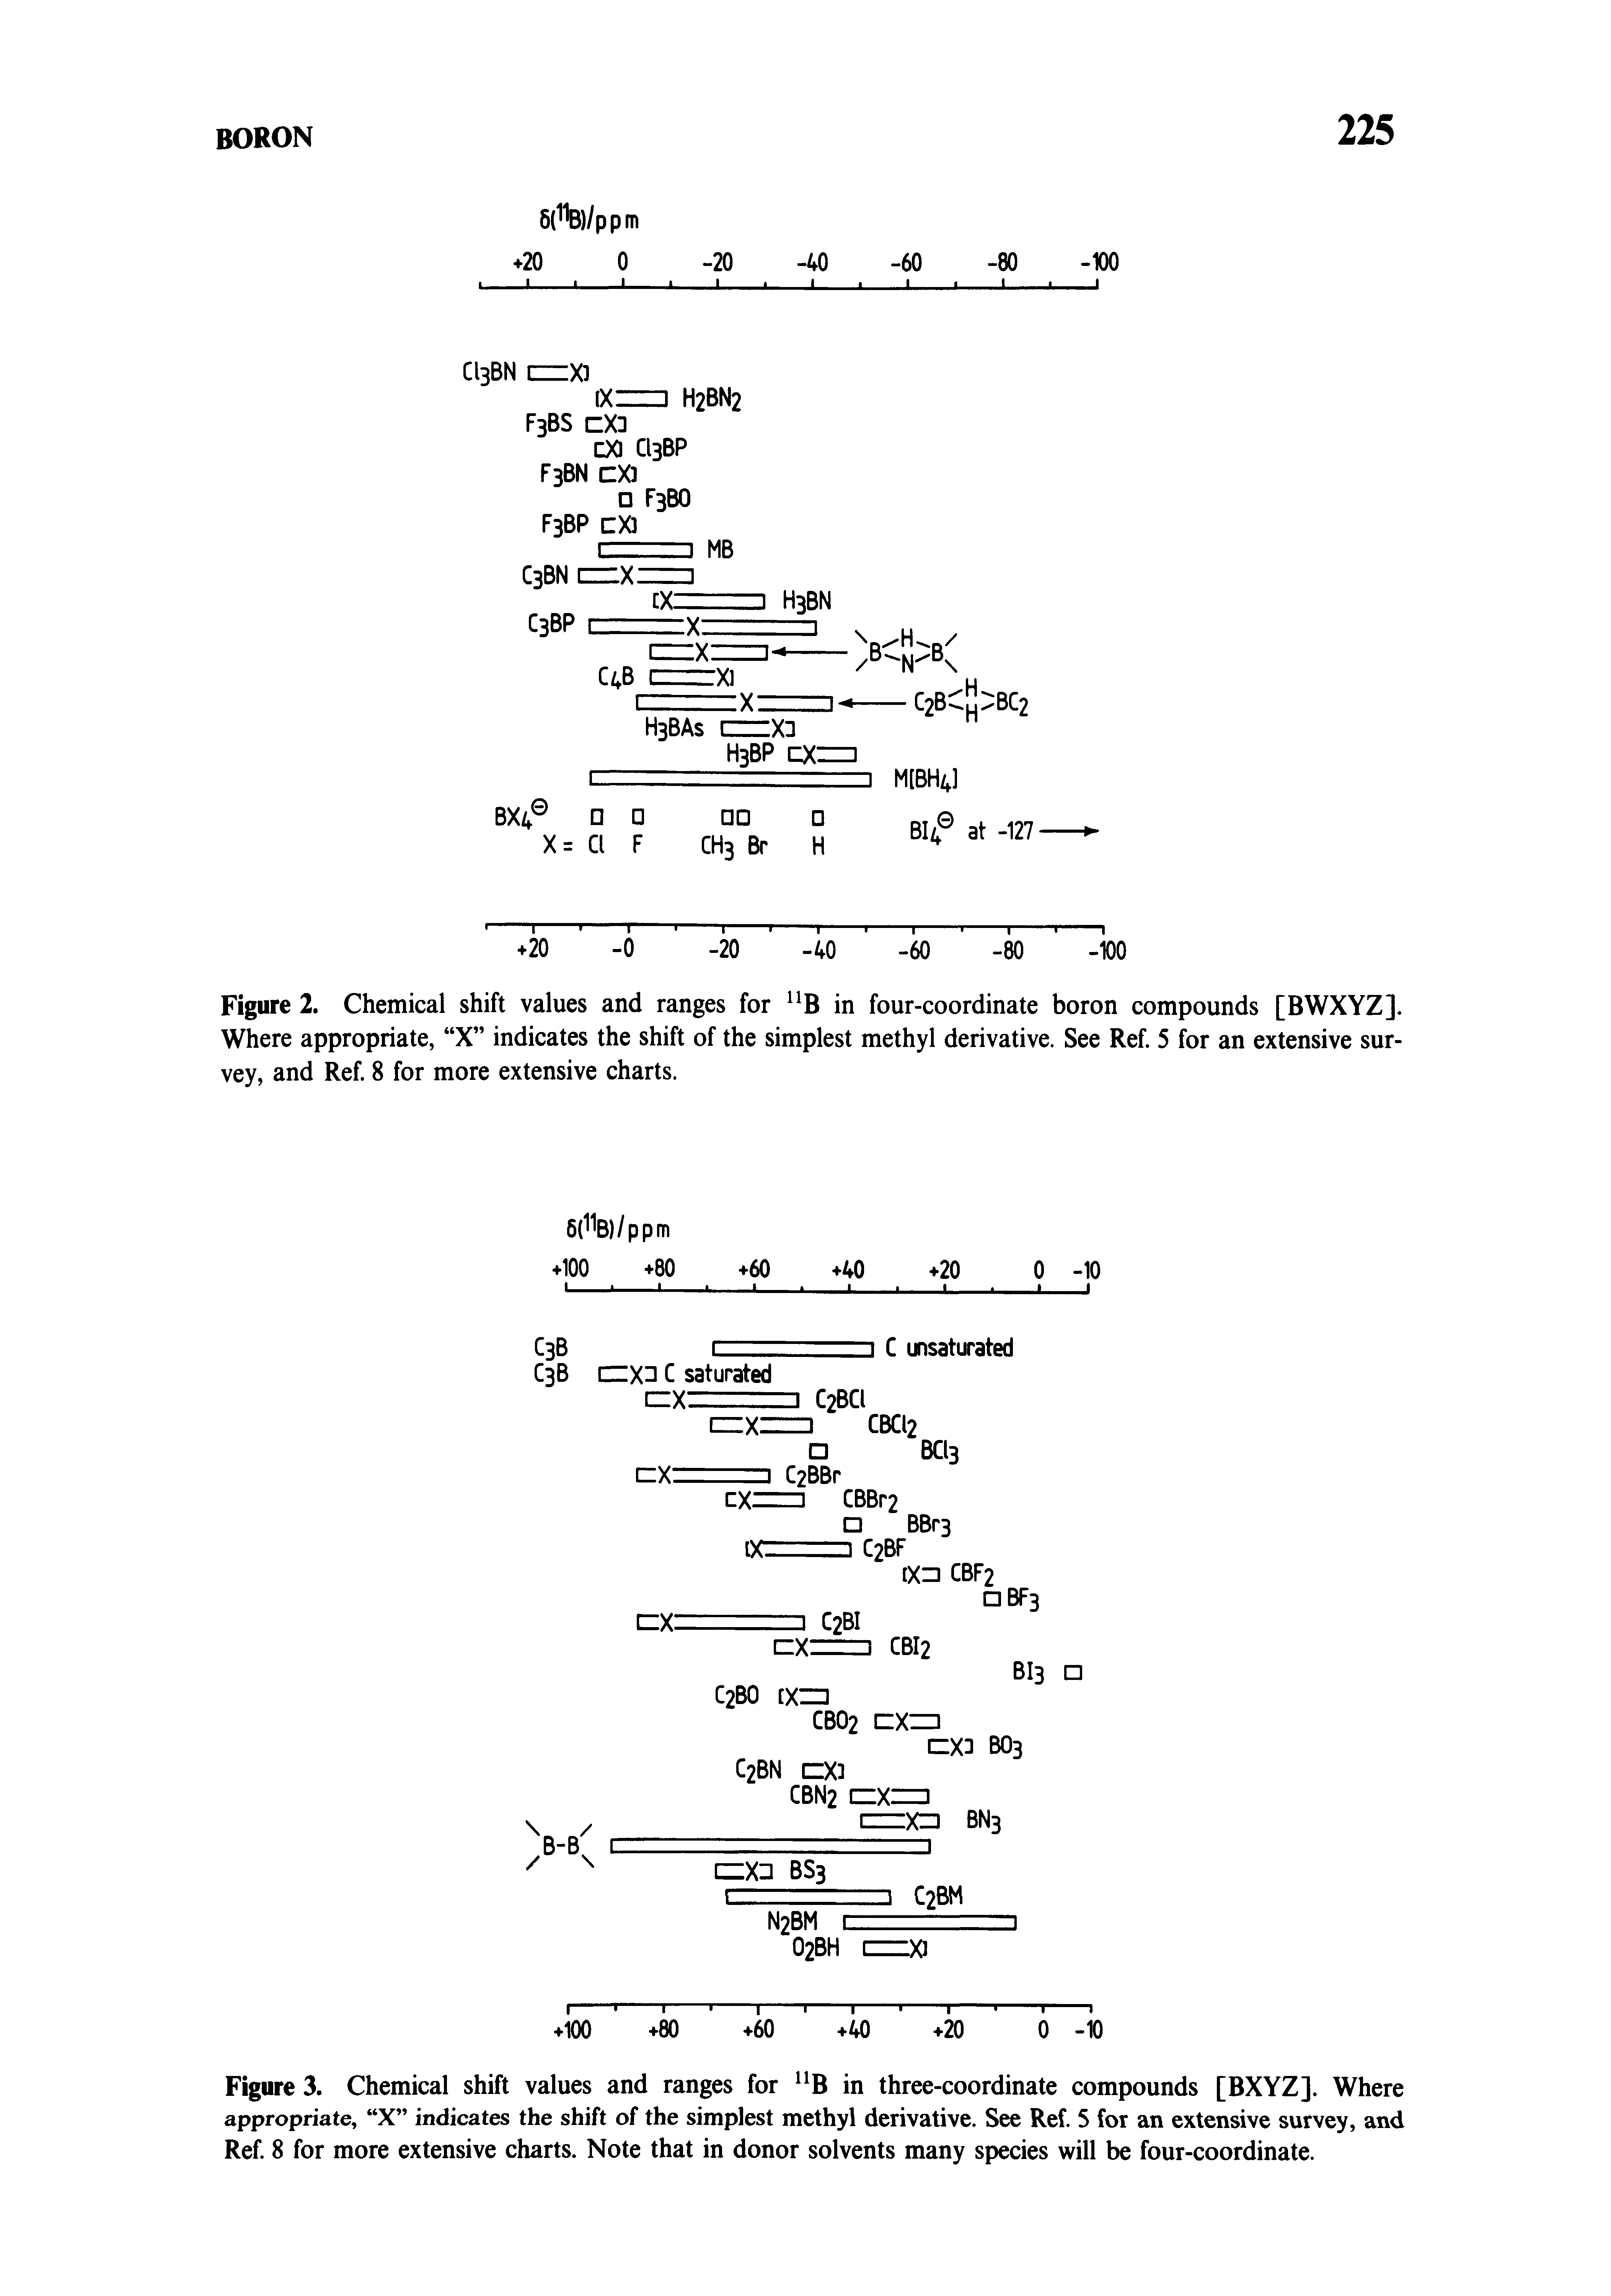 Figure 3. Chemical shift values and ranges for B in three-coordinate compounds [BXYZ]. Where appropriate, X indicates the shift of the simplest methyl derivative. See Ref. 5 for ai extensive survey, and Ref. 8 for more extensive charts. Note that in donor solvents many species will be four-coordinate.